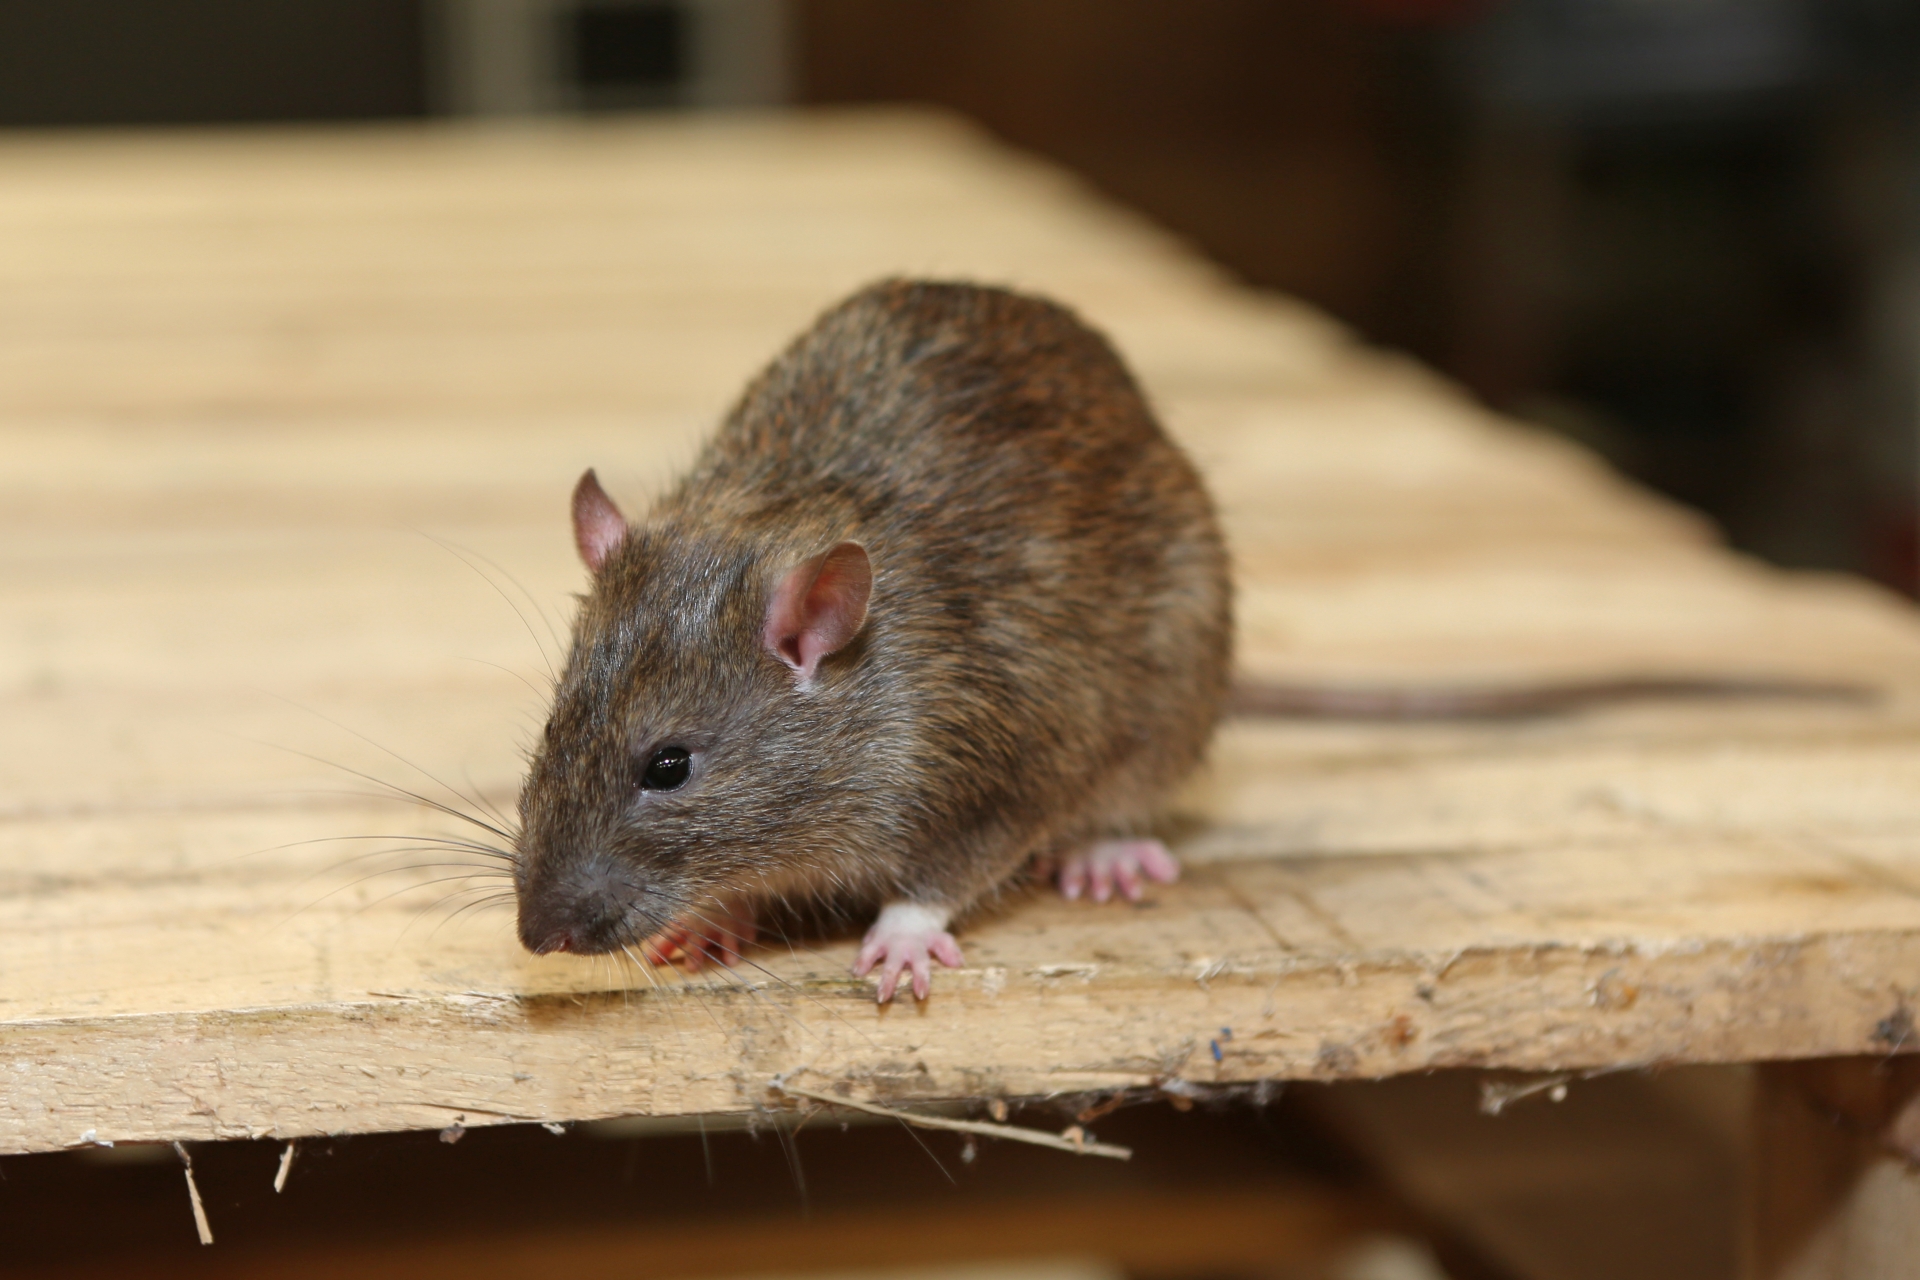 Rat extermination, Pest Control in Petts Wood, St Mary Cray, BR5. Call Now 020 8166 9746